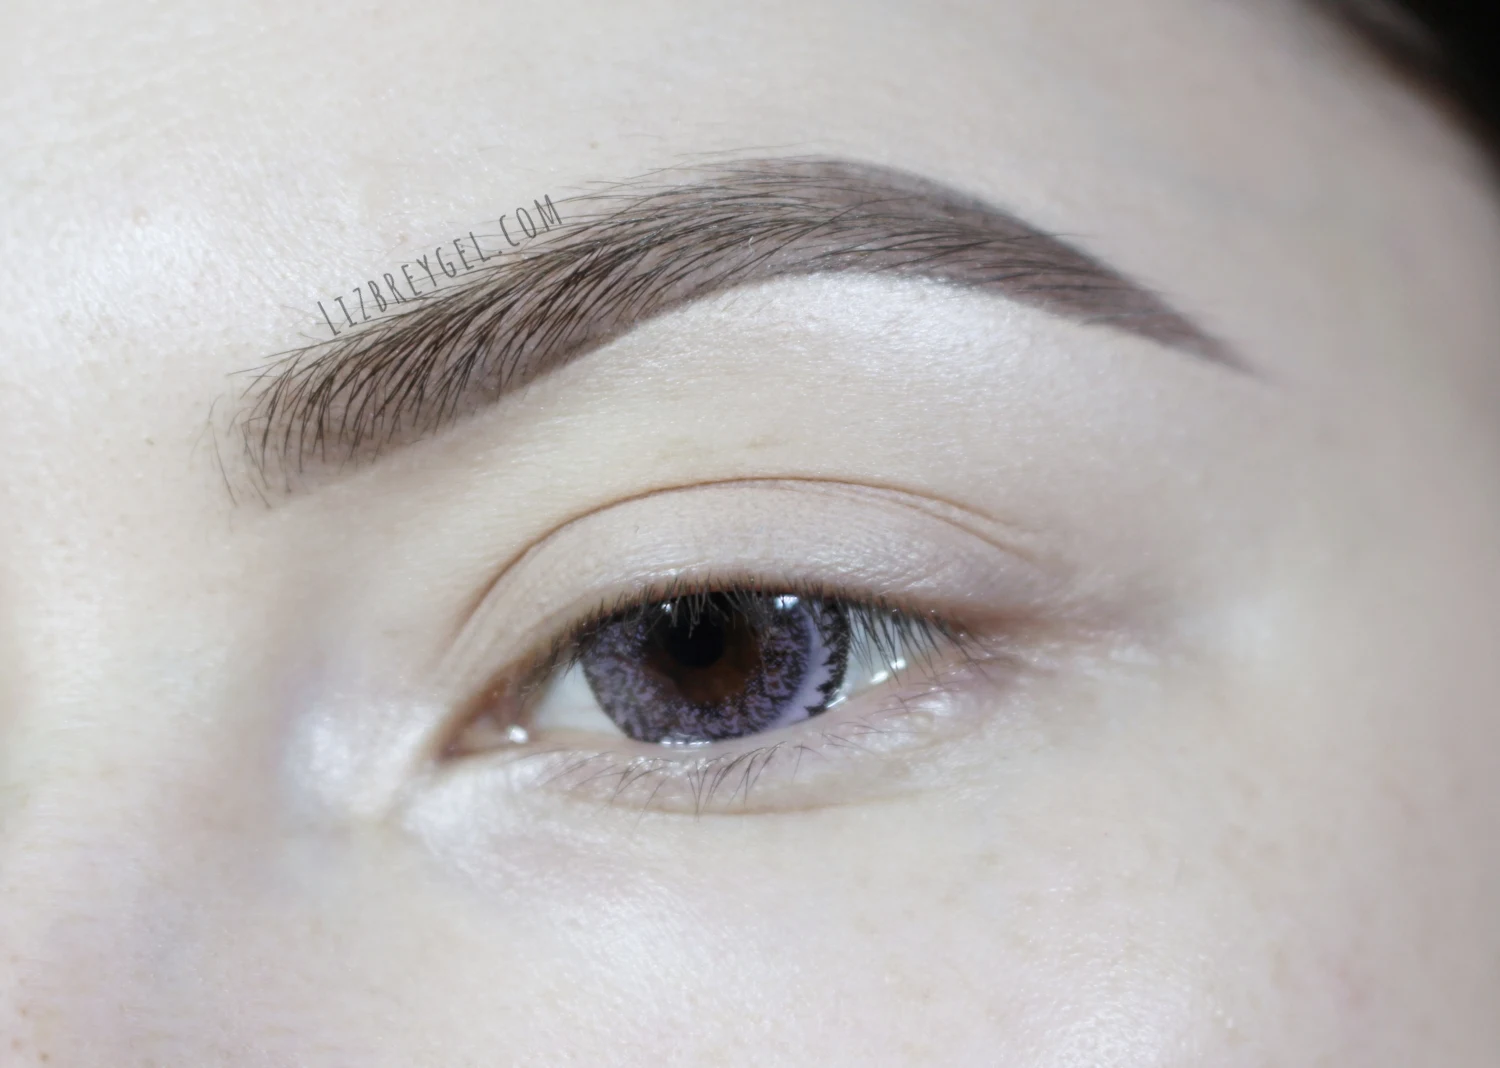 a close-up of an eye with neat, beautiful Instagram eyebrow look